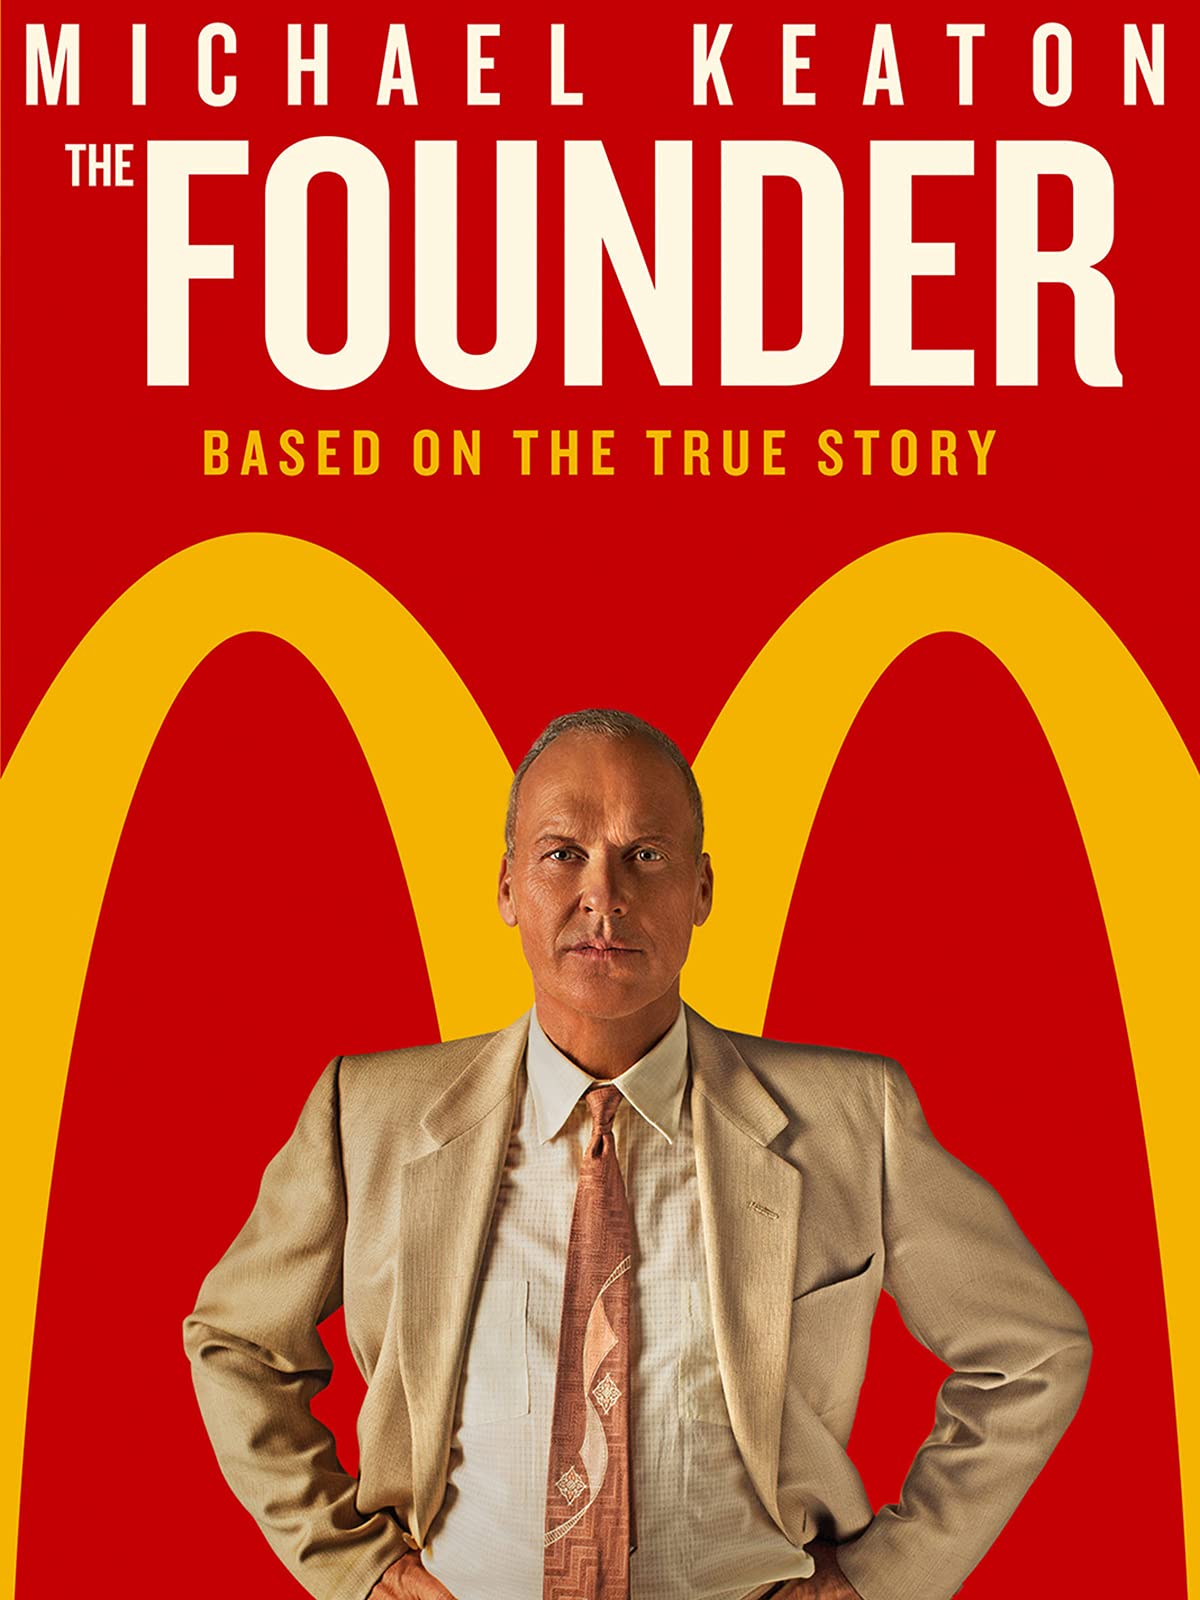 The Founder (2016) starring Michael Keaton